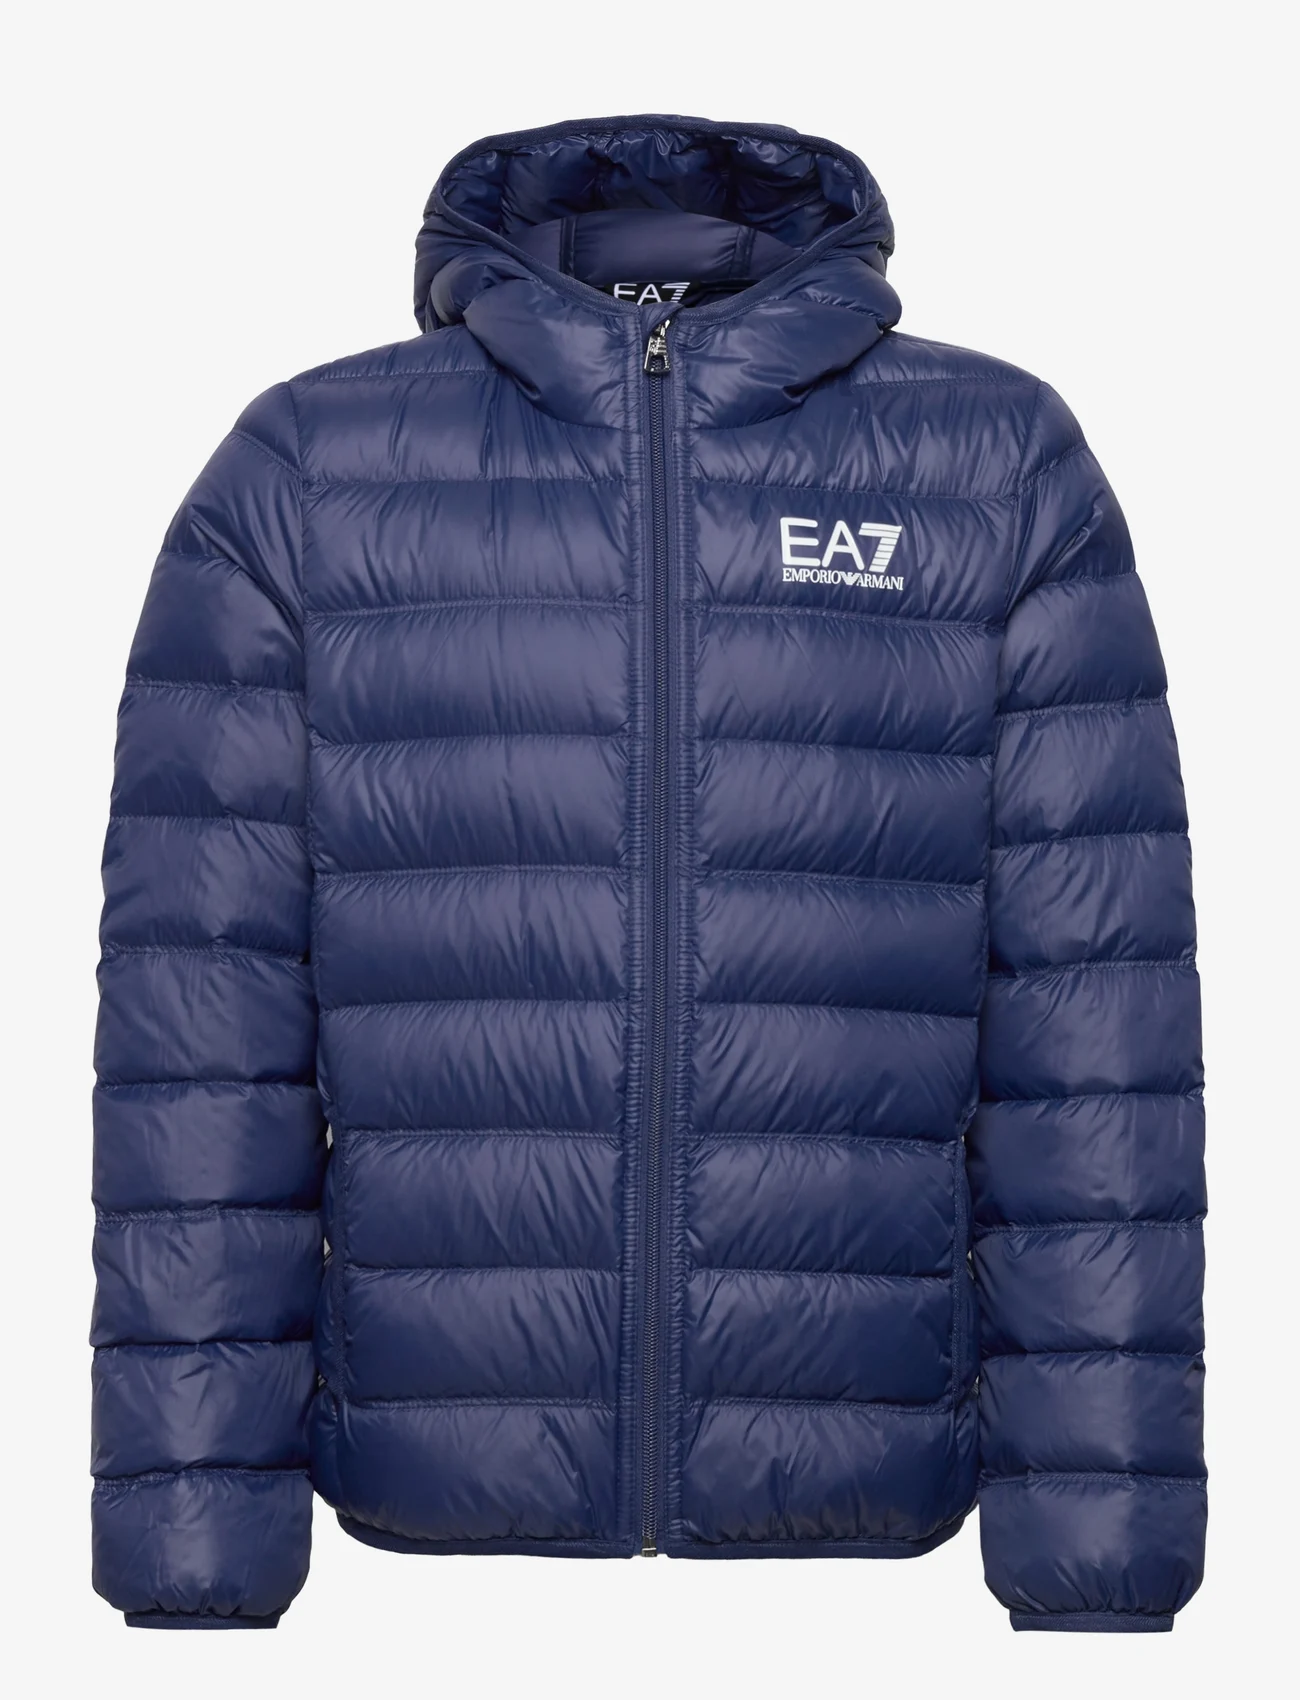 EA7 - OUTERWEAR - insulated jackets - 1554-navy blue - 0